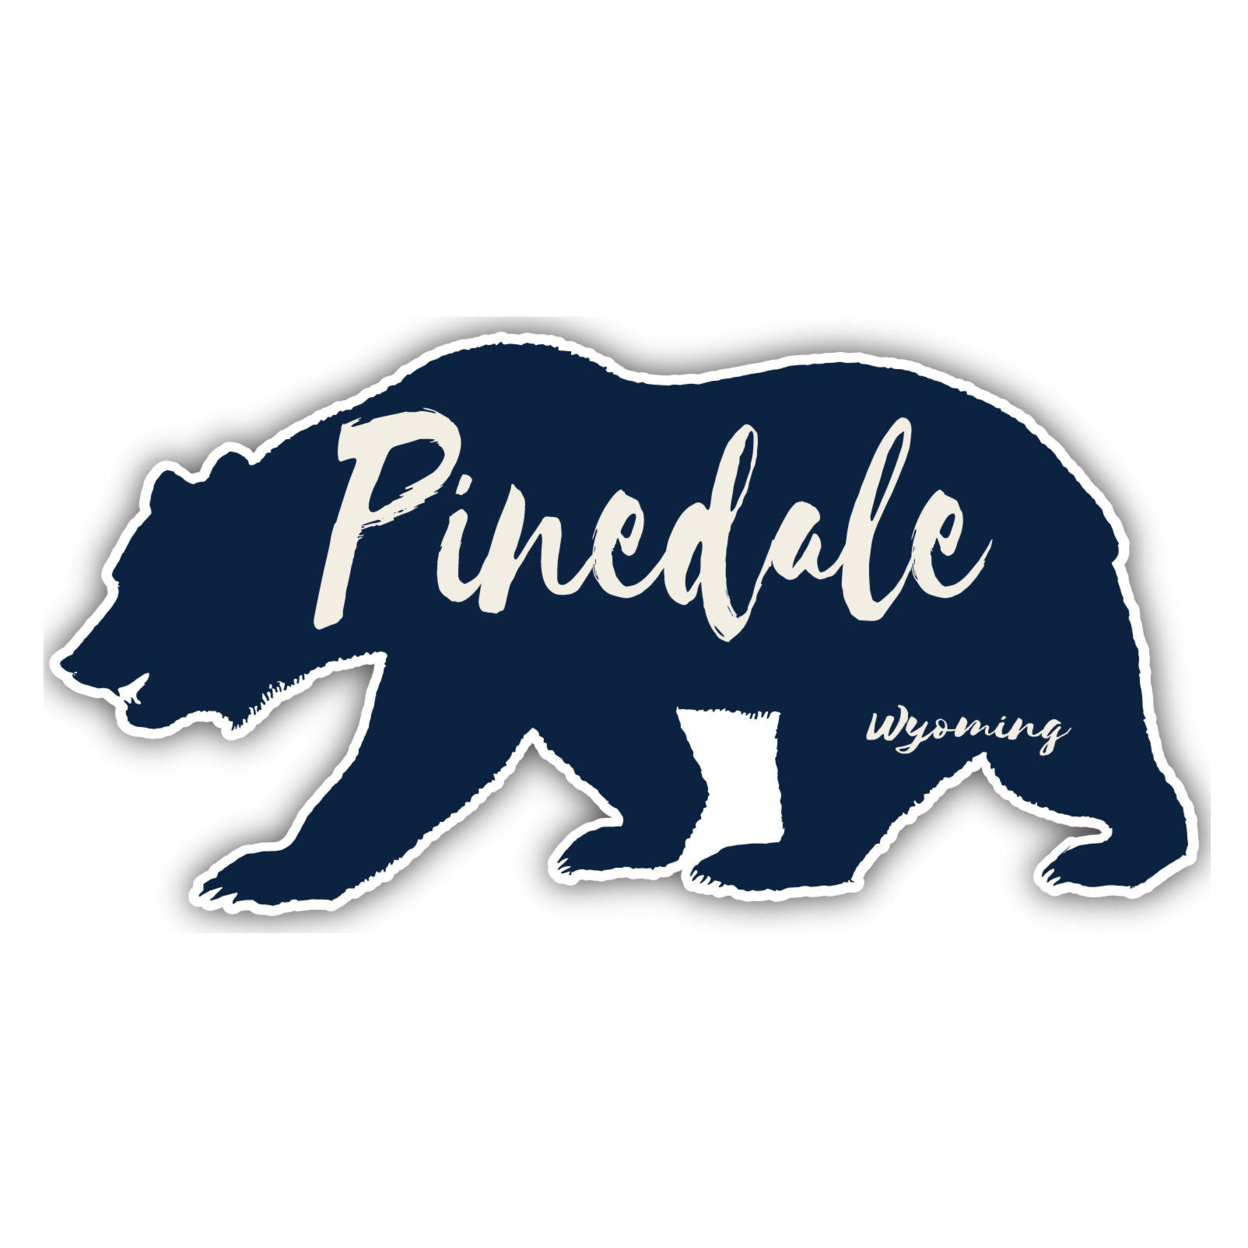 Pinedale Wyoming Souvenir Decorative Stickers (Choose Theme And Size) - Single Unit, 4-Inch, Bear